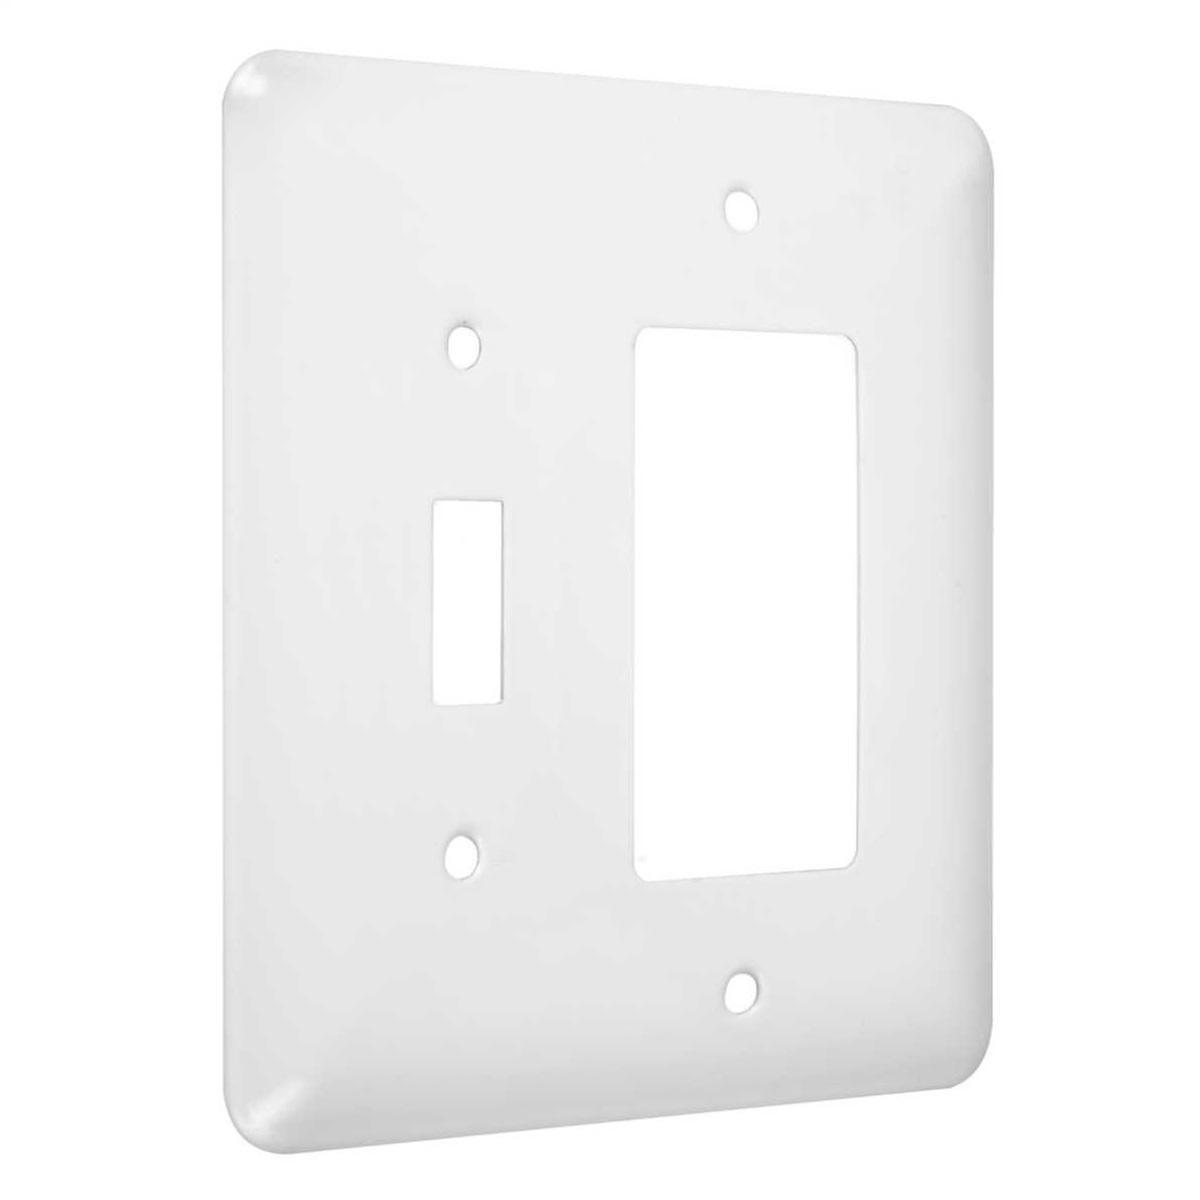 Hubbell WRW-TR 2-Gang Metal Wallplate, Maxi, Toggle/Decorator White Smooth  ; Easily primed and painted to match or complement walls. ; Won't bow, crack or distort during installation. ; Premium North American powder coat. ; Includes screw(s) in matching finish.